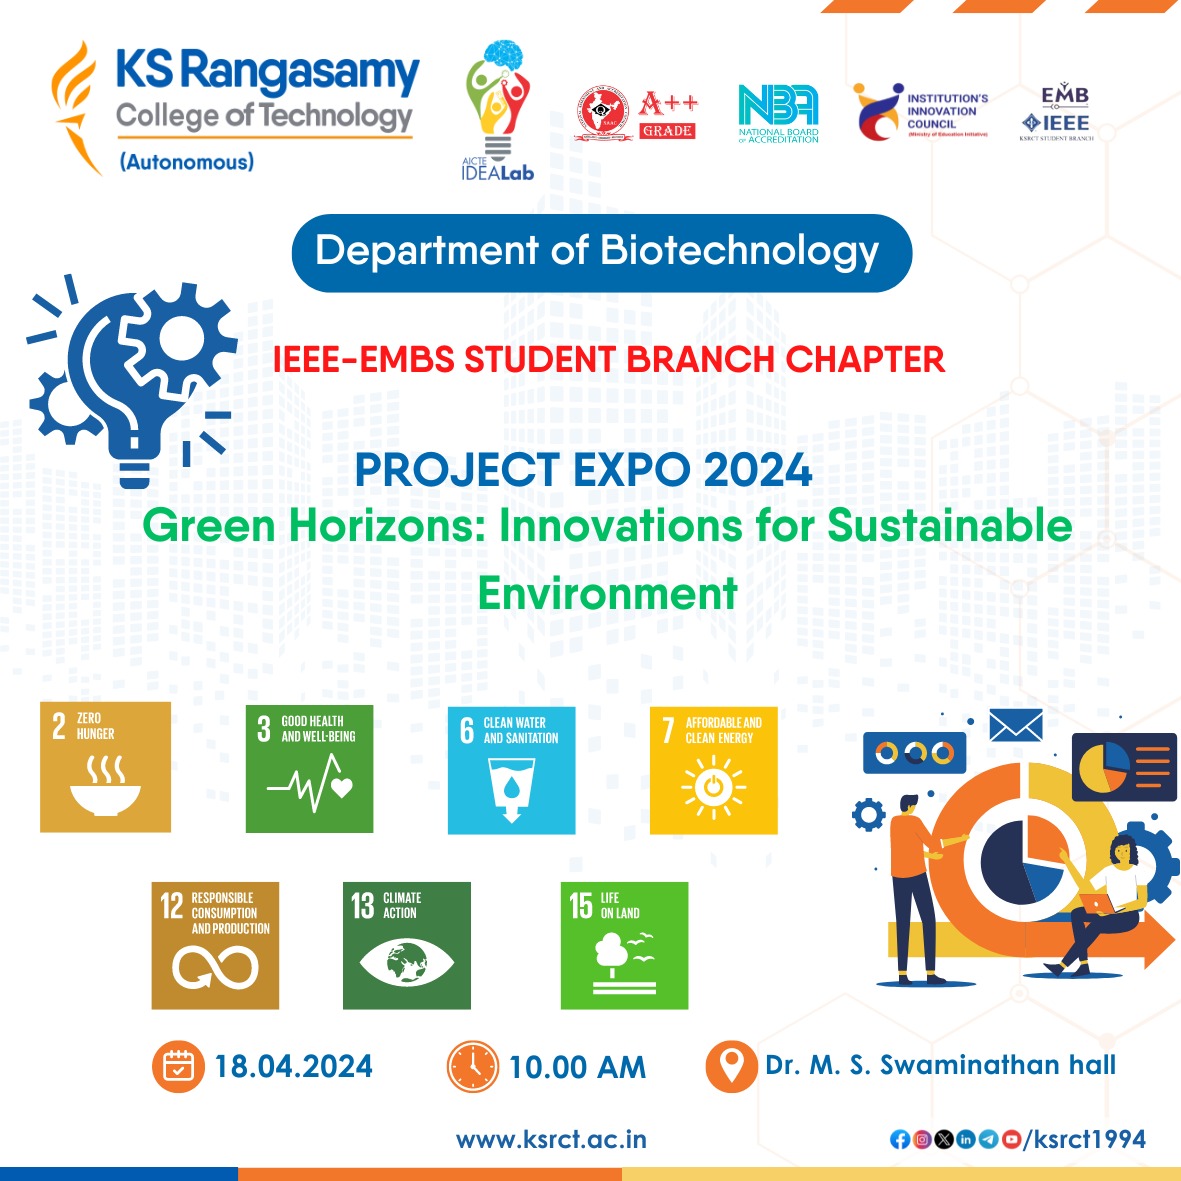 IEEE-EMBS Student Branch Chapter, Department of Biotechnology, K.S.Rangasamy College of Technology #ksrct1994 organizes #ProjectExpo in the theme of 'Green Horizons: Innovations for Sustainable Environment' on 18.04.2024 (Thursday) @ 10:00 am.
Venue: Dr. M S Swamynathan Hall